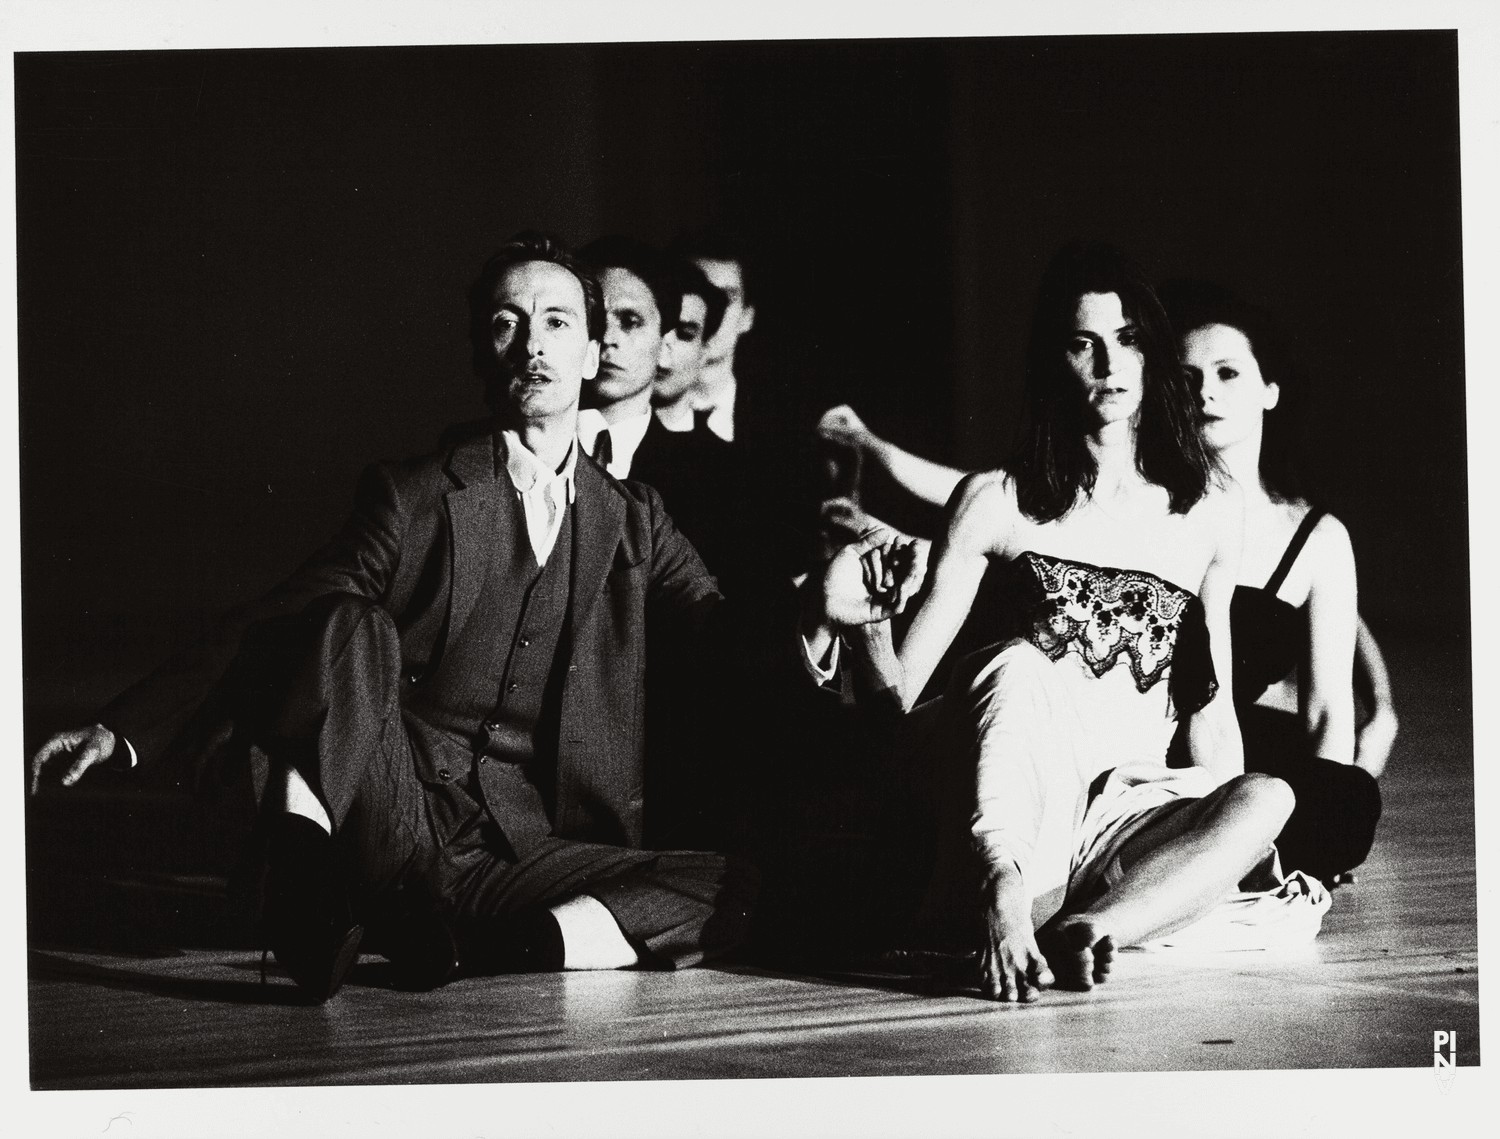 “Two Cigarettes in the Dark” by Pina Bausch